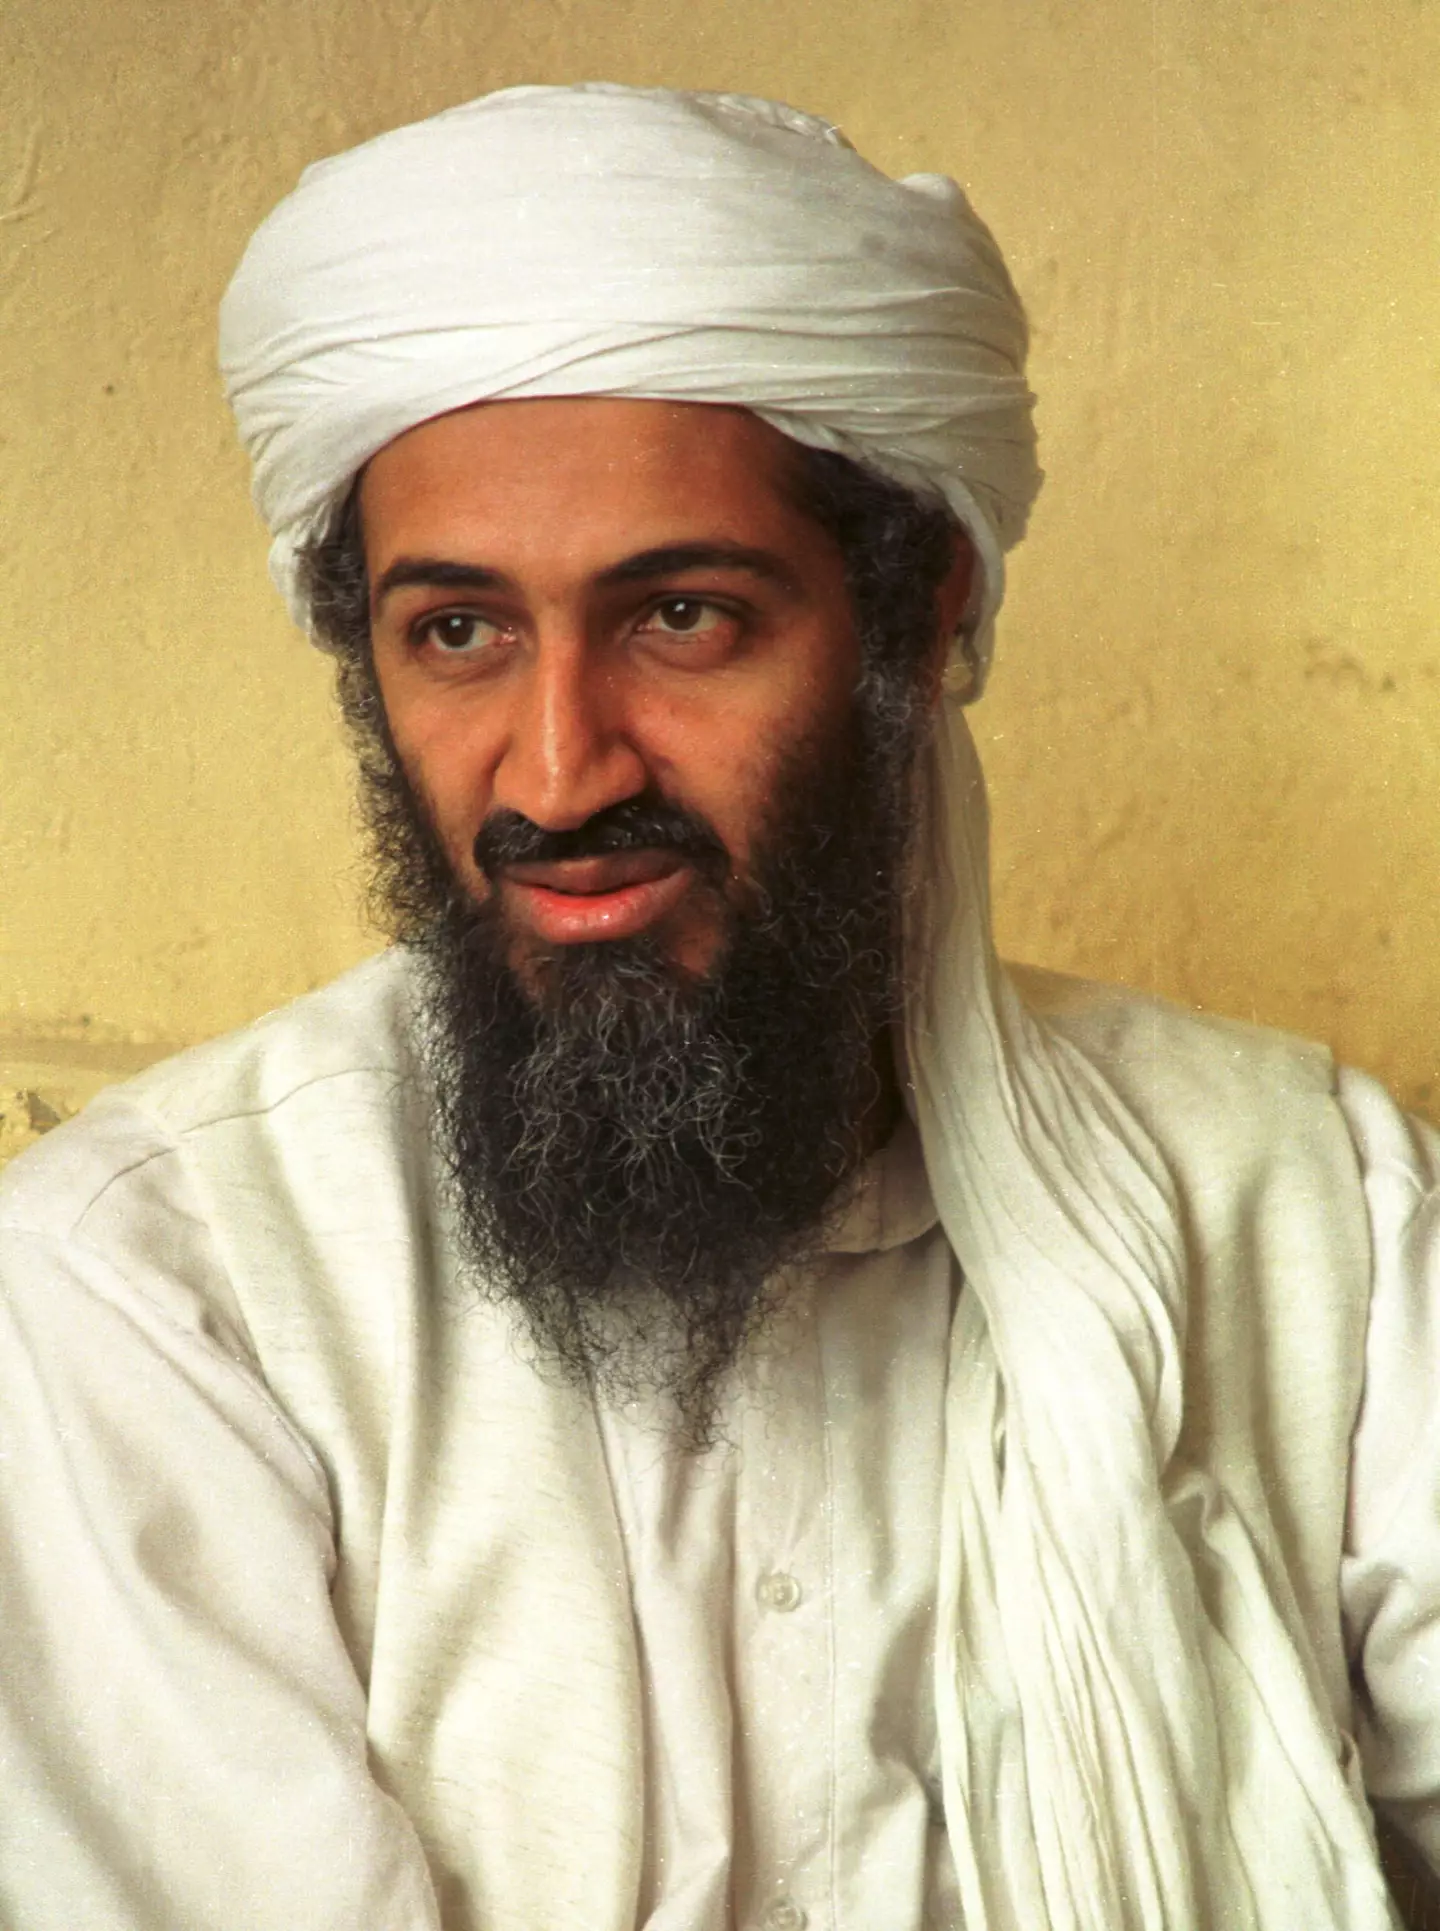 Osama Bin Laden was killed by US Navy Seals at his compound near Islamabad, Pakistan on May 2, 2011.